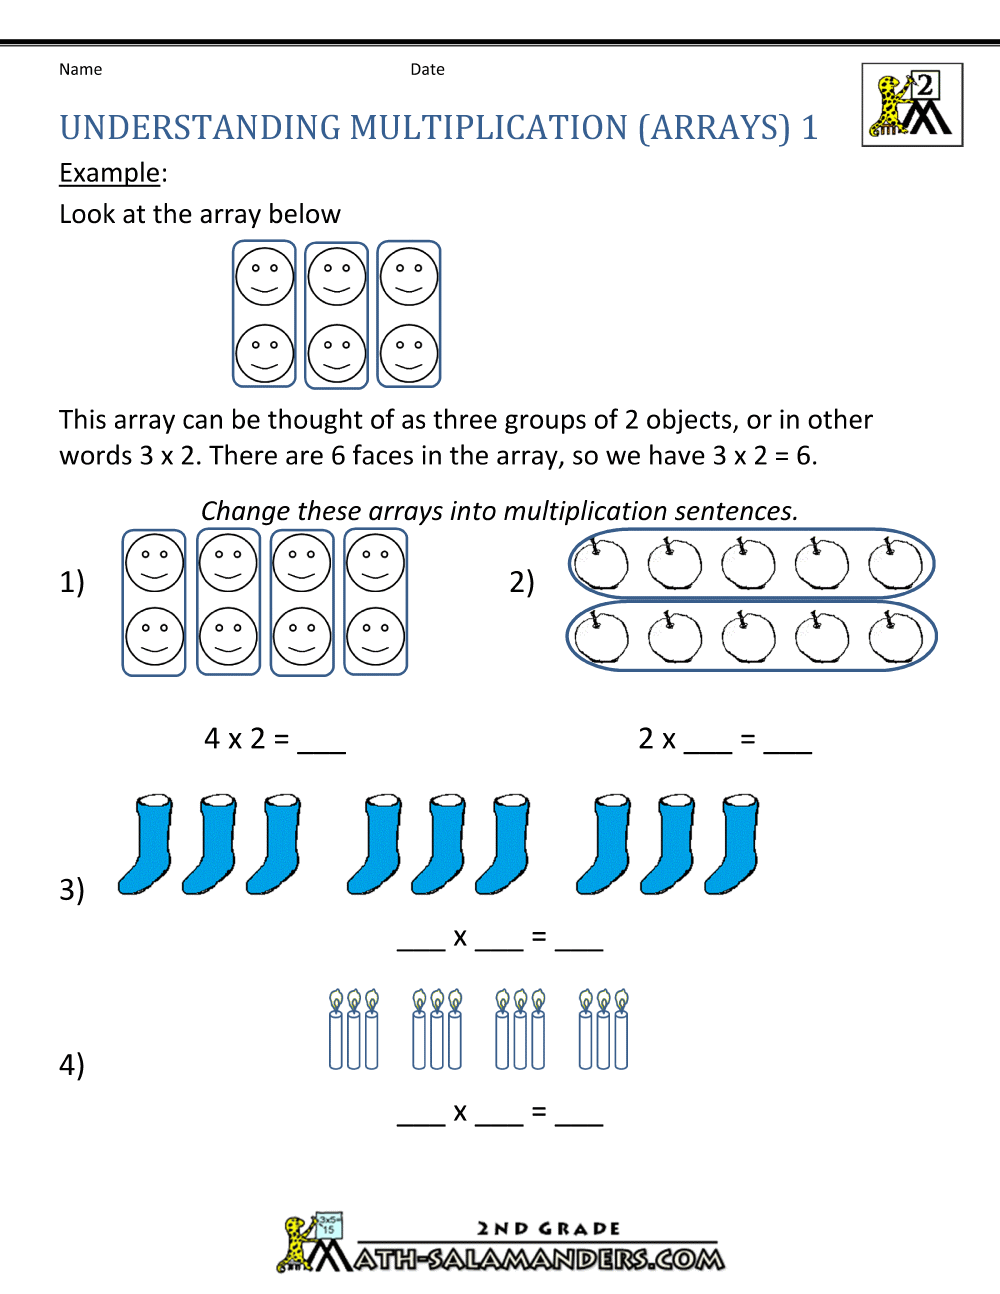 multiplication-and-arrays-worksheets